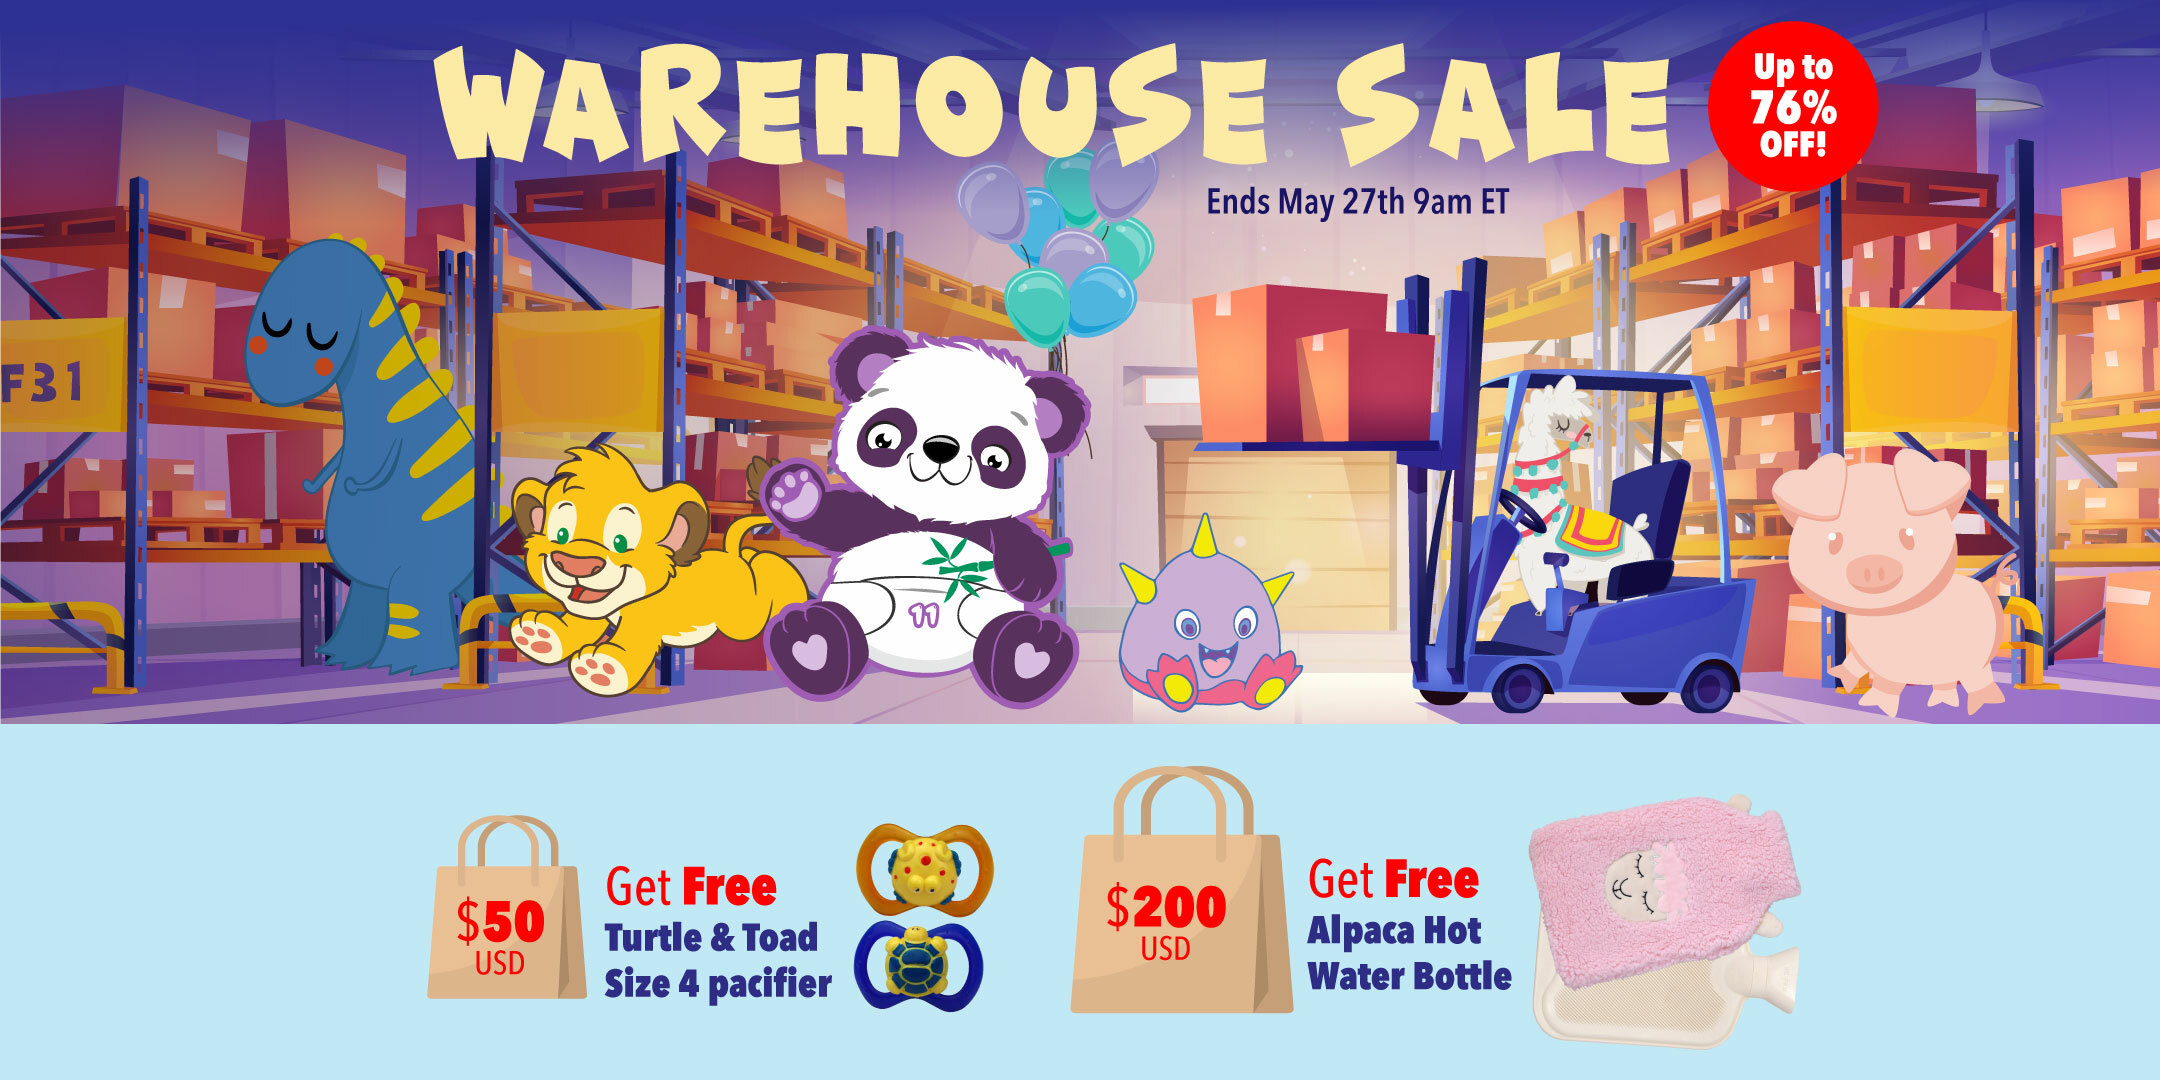 Rearz Warehouse Sale - Up to 76% OFF